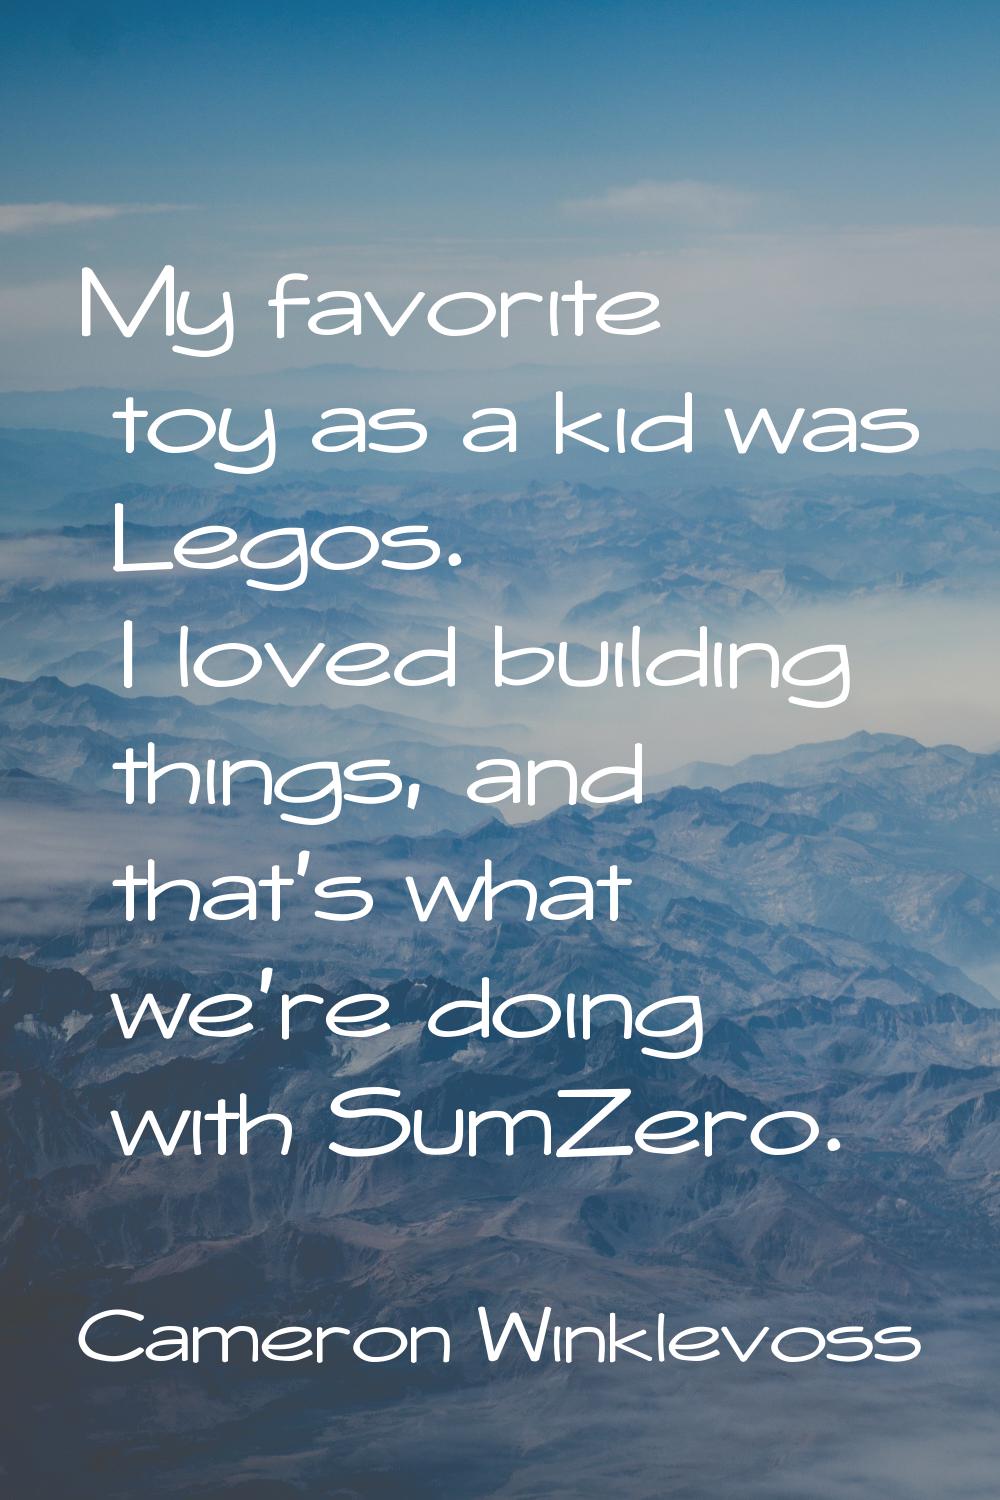 My favorite toy as a kid was Legos. I loved building things, and that's what we're doing with SumZe